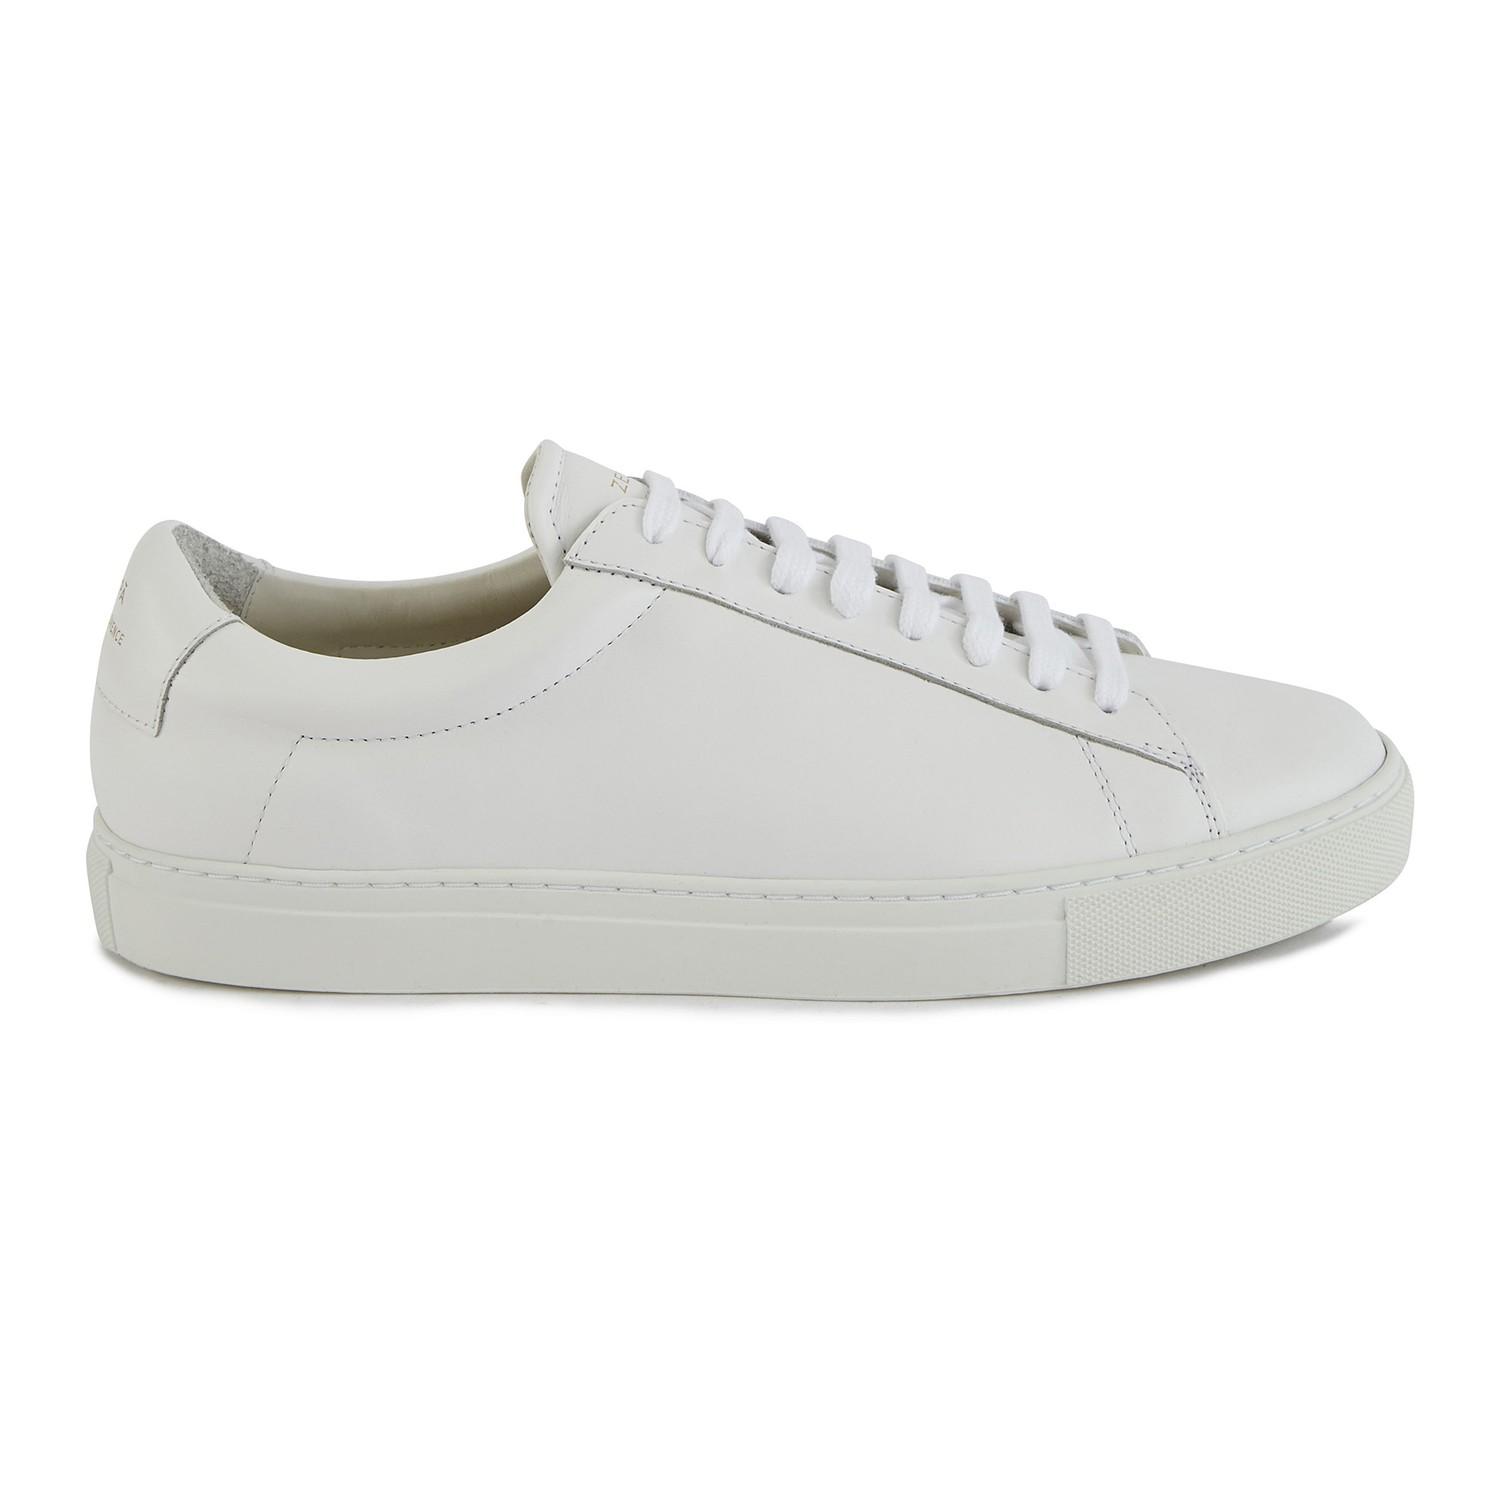 Zespà Zsp4 Trainers in White for Men - Save 50% - Lyst